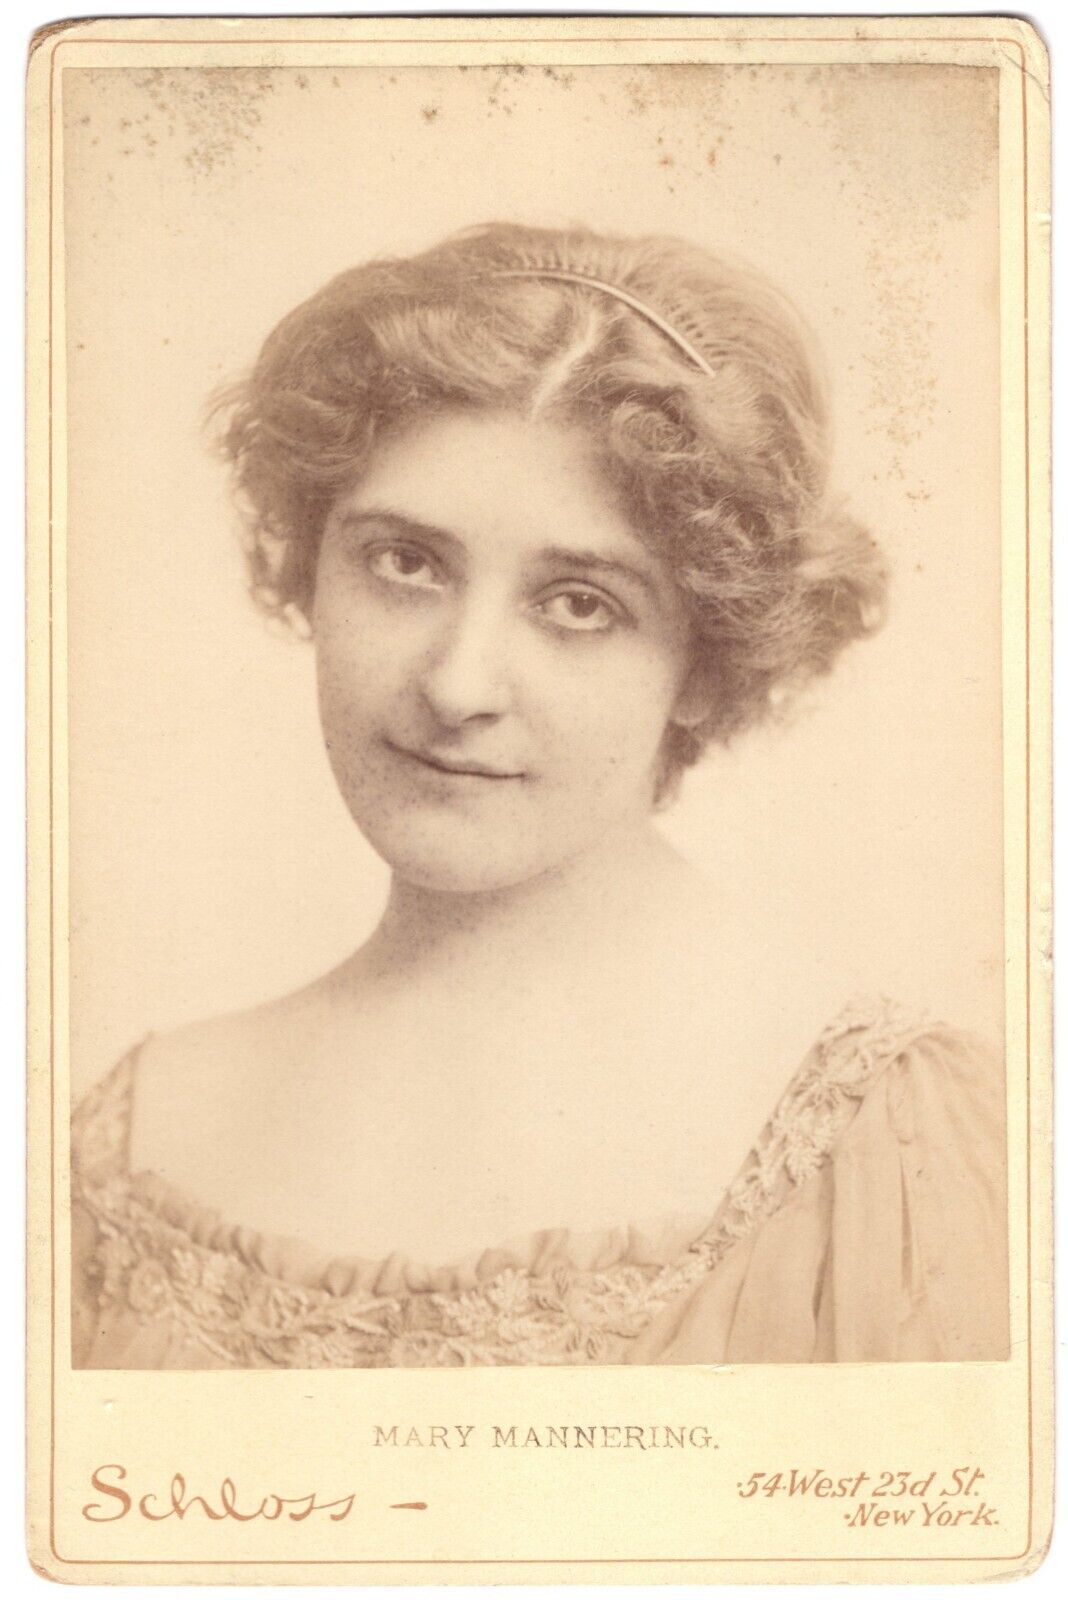 MARY MANNERING : THEATRE STAR : PHOTO BY JACOB SCHLOSS : CABINET CARD